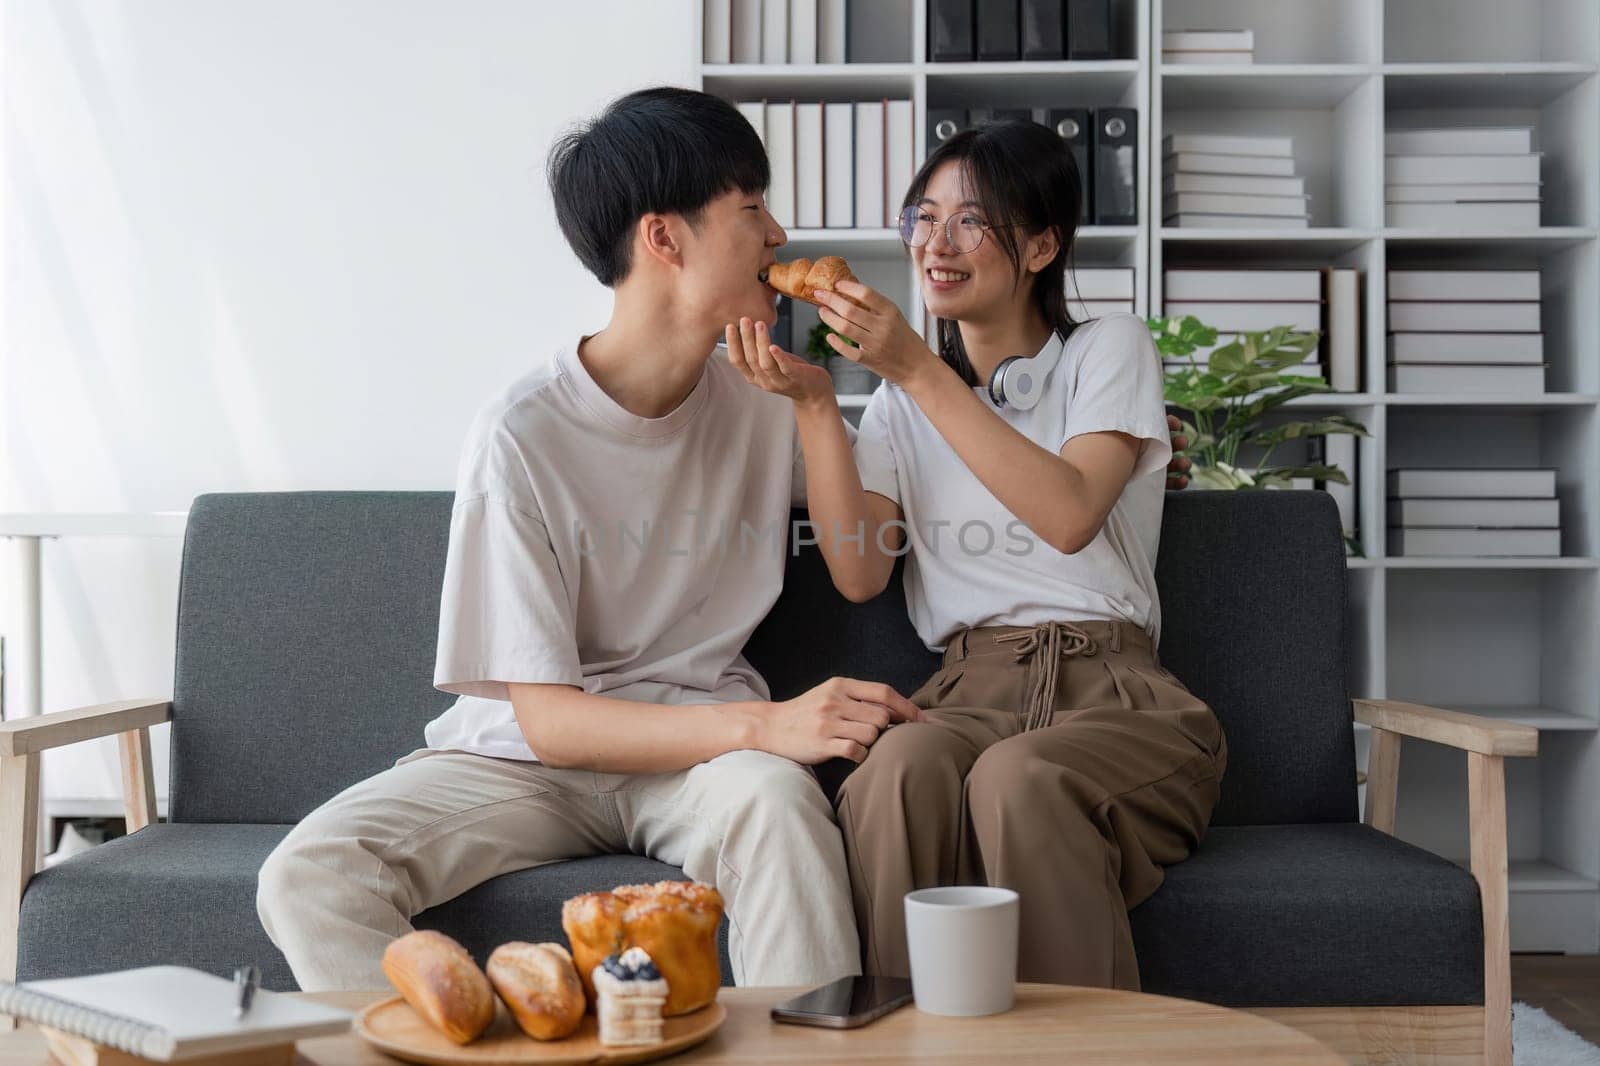 Young couples spend holidays in the living room. The young man was wearing comfortable clothes, showing his face, satisfied with the taste of snacks. Eating croissant on the sofa.